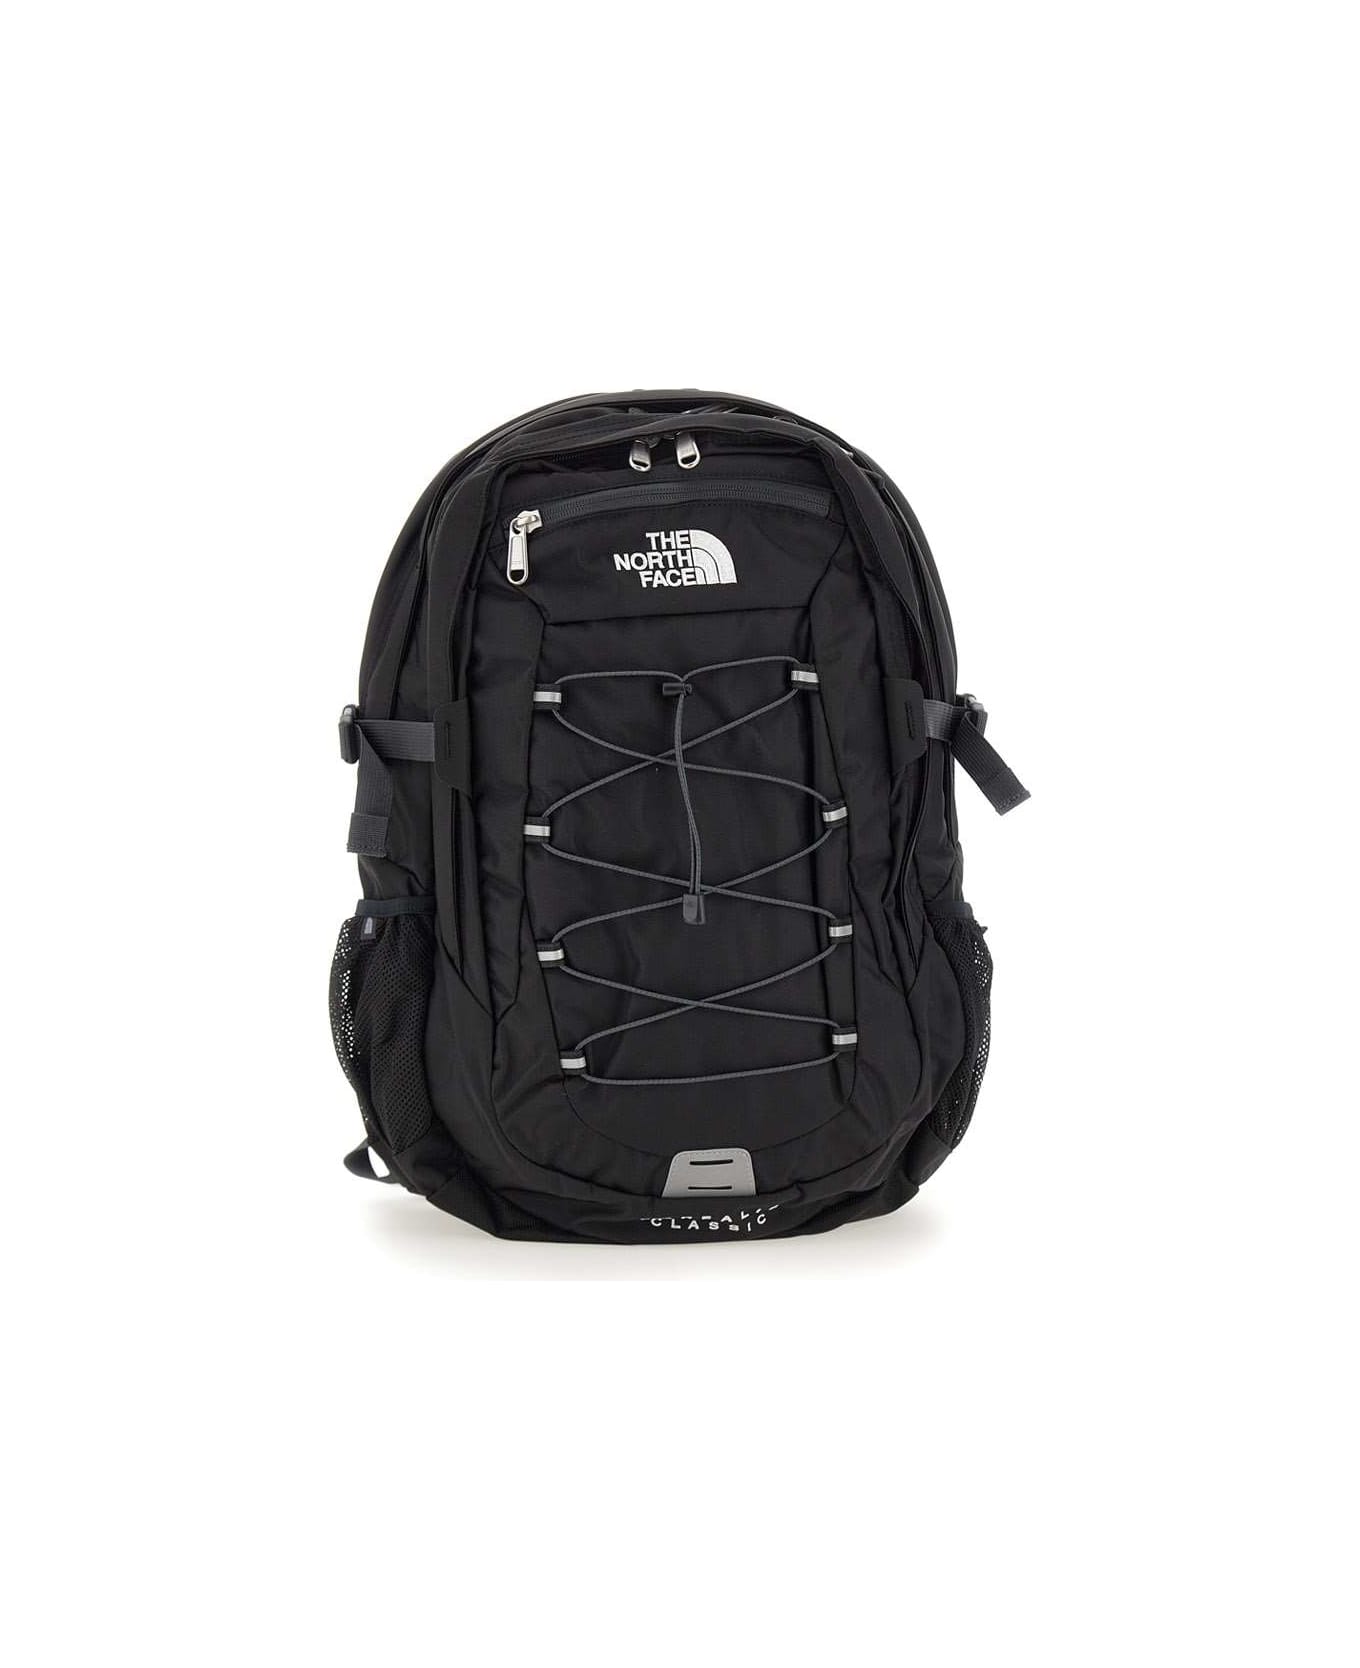 The North Face "borealis Classic" Backpack - BLACK